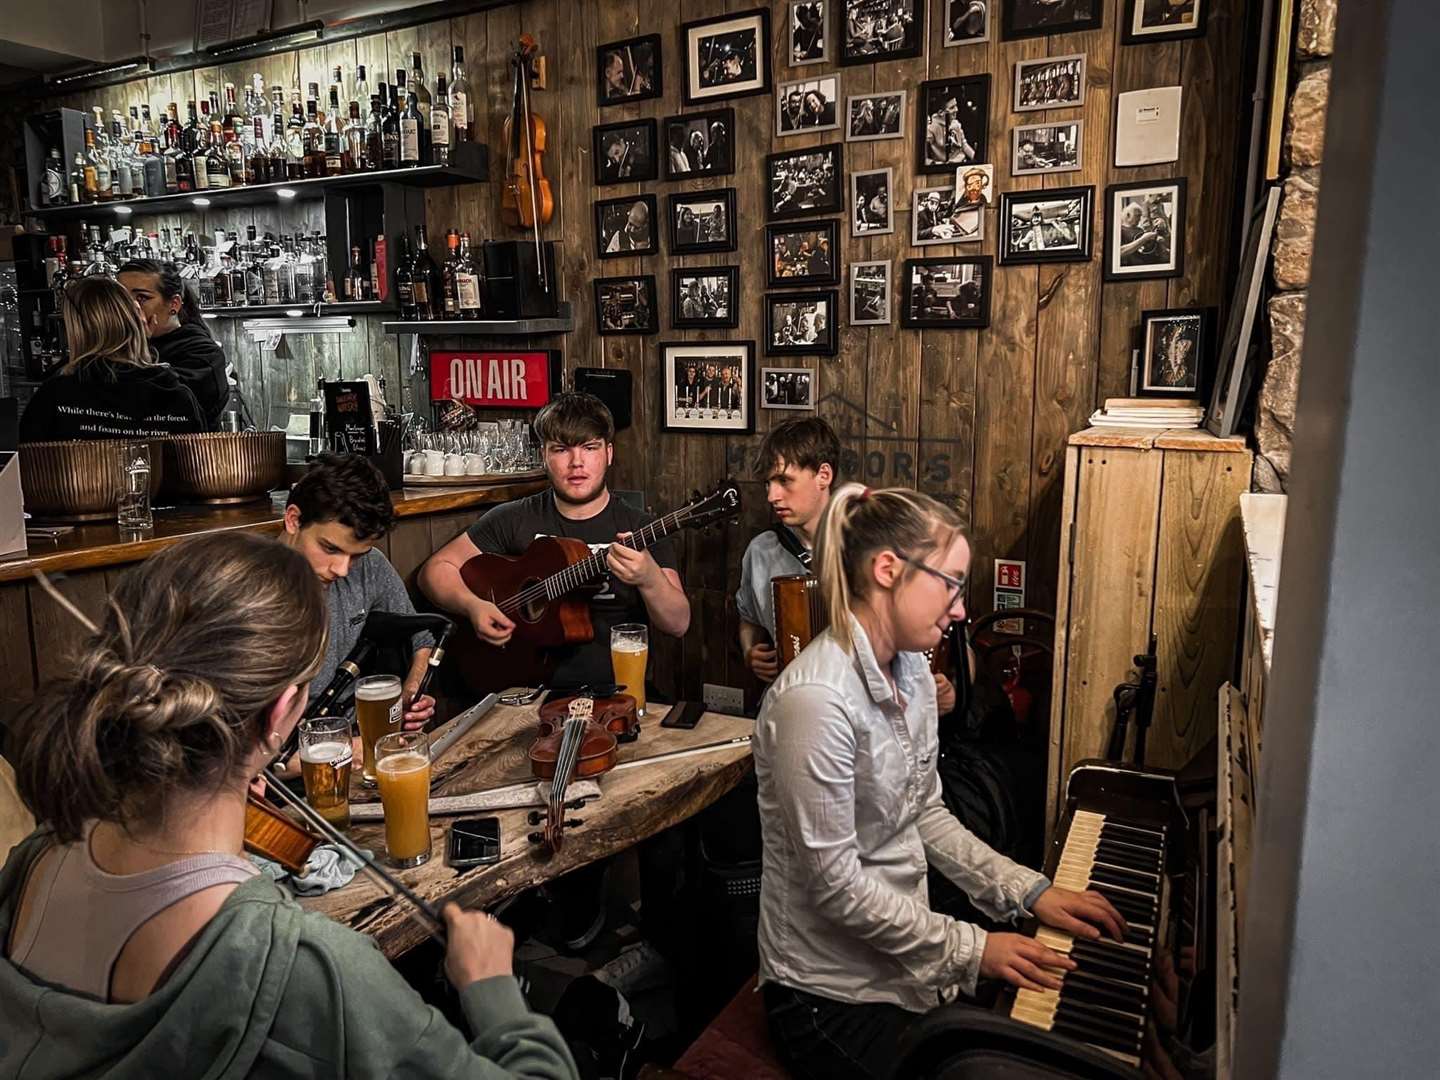 Live traditional music at MacGregor's Bar has been pulling in a worldwide audience thanks to streaming.